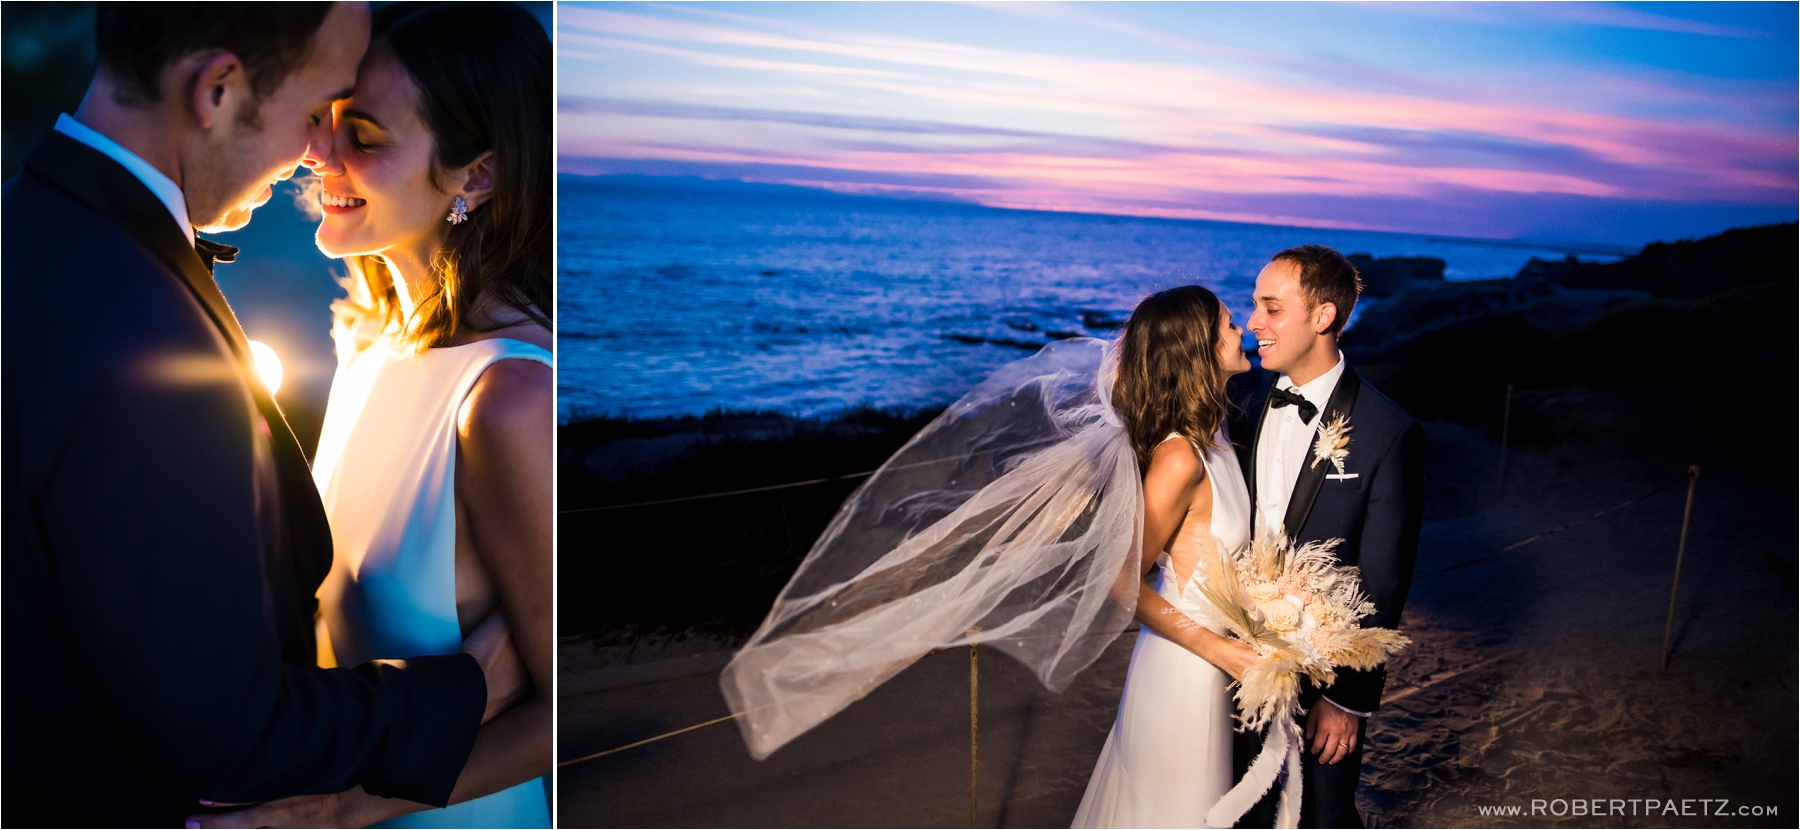 A intimate zoom wedding at Pelican Hill and Crystal Cove in Newport Beach, photographed by the west coast and destination photographer Robert Paetz.